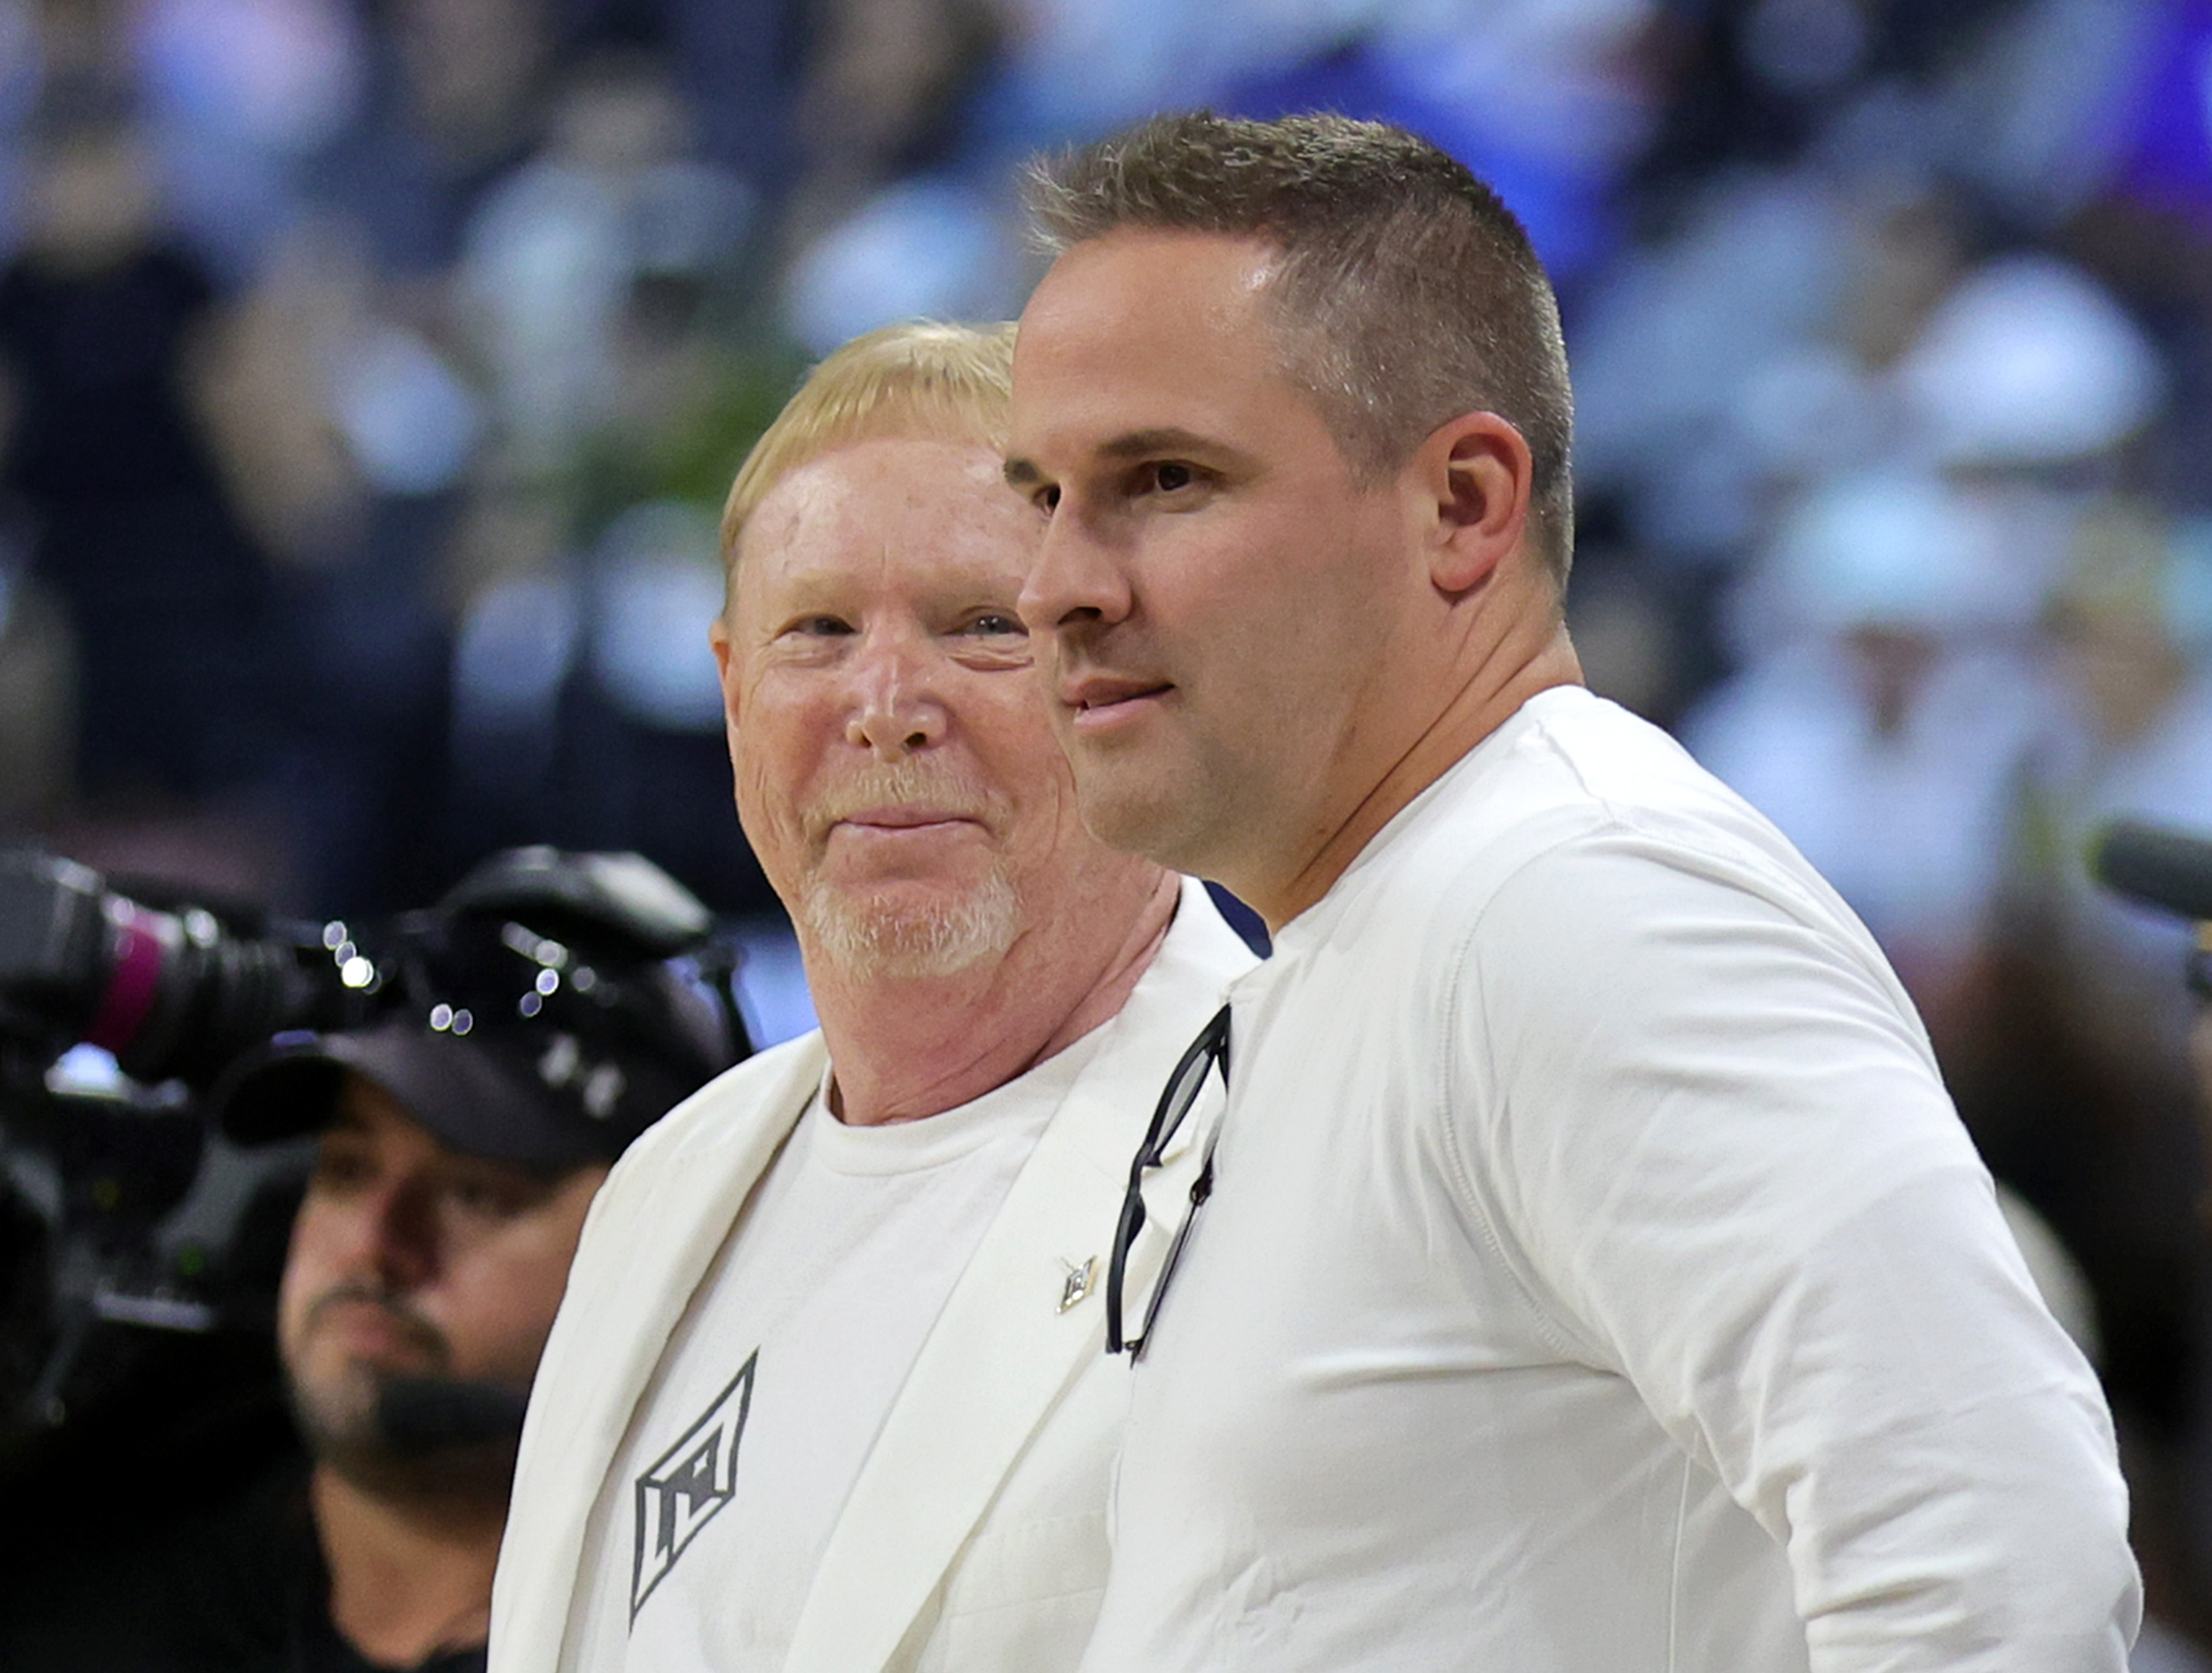 LAS VEGAS, NEVADA - AUGUST 28: Las Vegas Raiders owner and managing general partner and Las Vegas Aces owner Mark Davis (L) and head coach Josh McDaniels of the Raiders attend Game One of the 2022 WNBA Playoffs semifinals between the Aces and the Seattle Storm at Michelob ULTRA Arena on August 28, 2022 in Las Vegas, Nevada. The Storm defeated the Aces 76-73. NOTE TO USER: User expressly acknowledges and agrees that, by downloading and or using this photograph, User is consenting to the terms and conditions of the Getty Images License Agreement. (Photo by Ethan Miller/Getty Images)